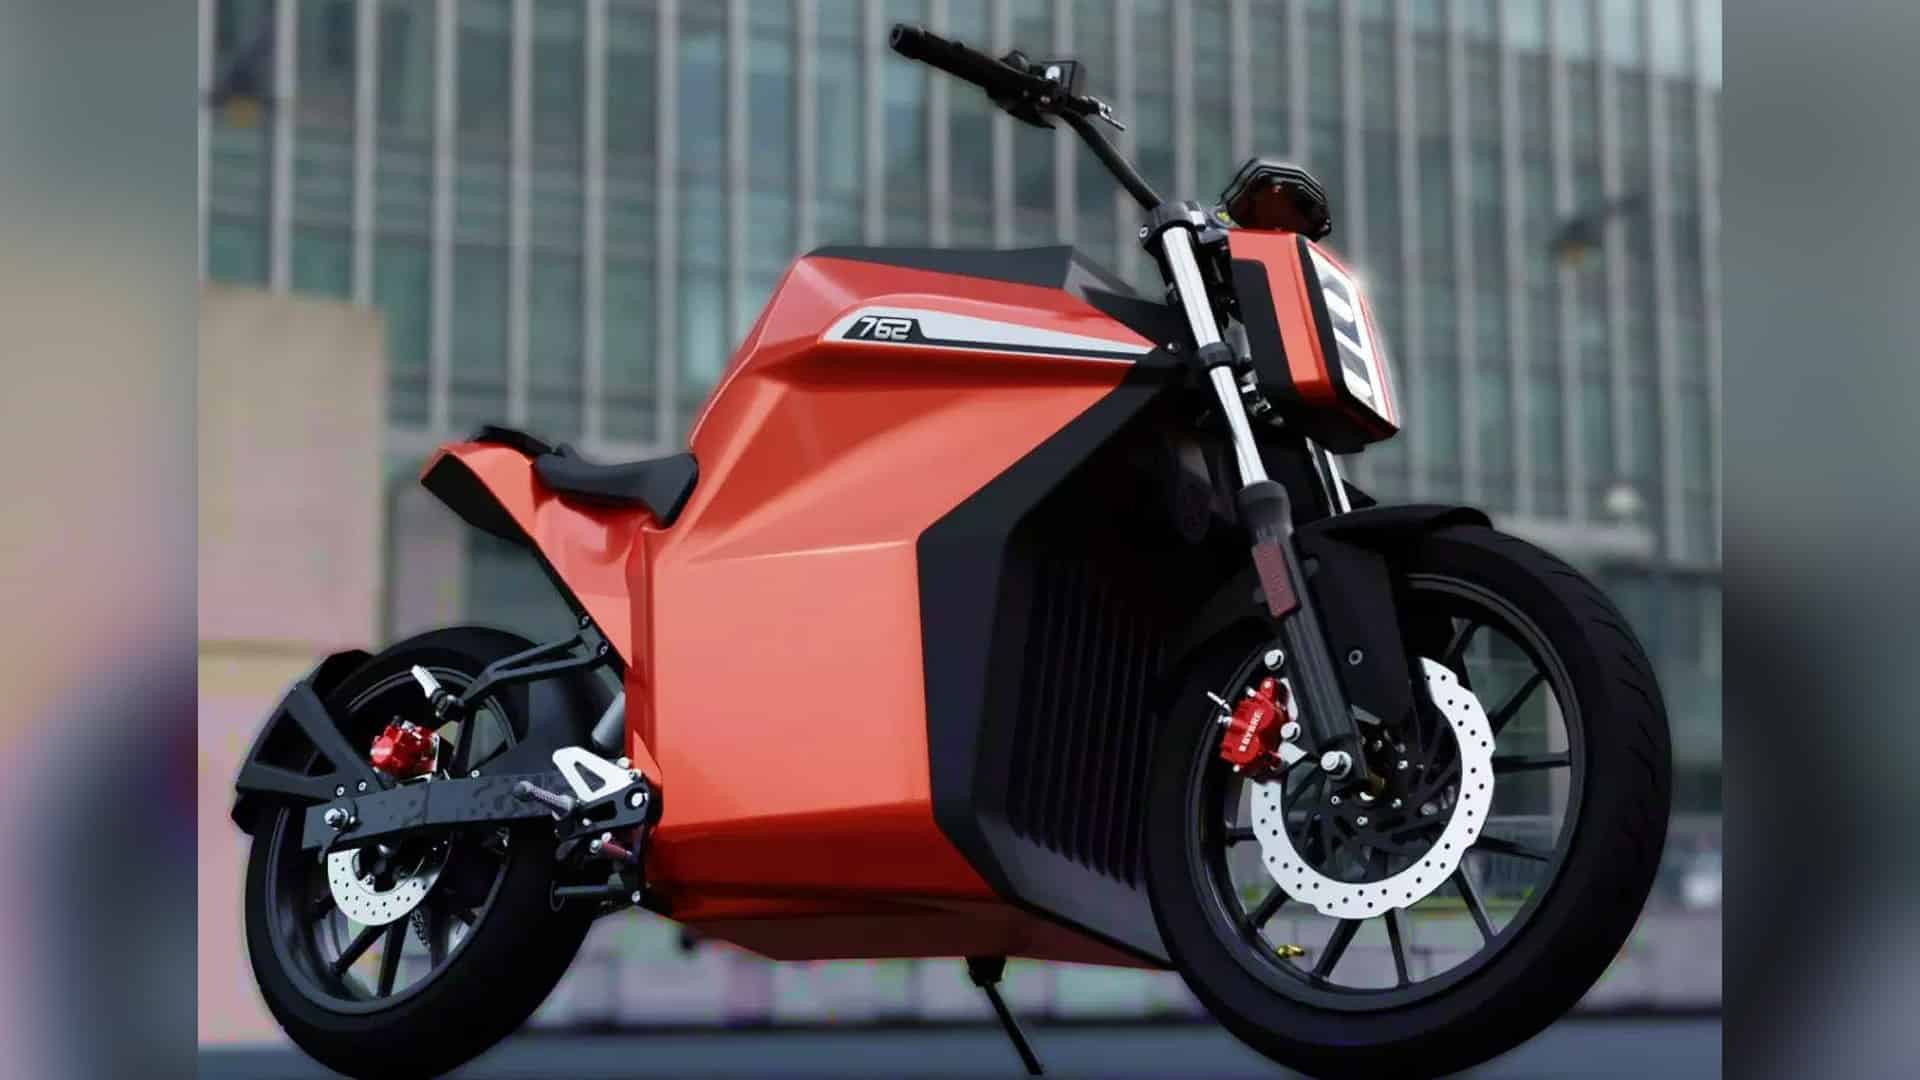 Svitch MotoCorp to invest Rs 100 crore in electric bike project